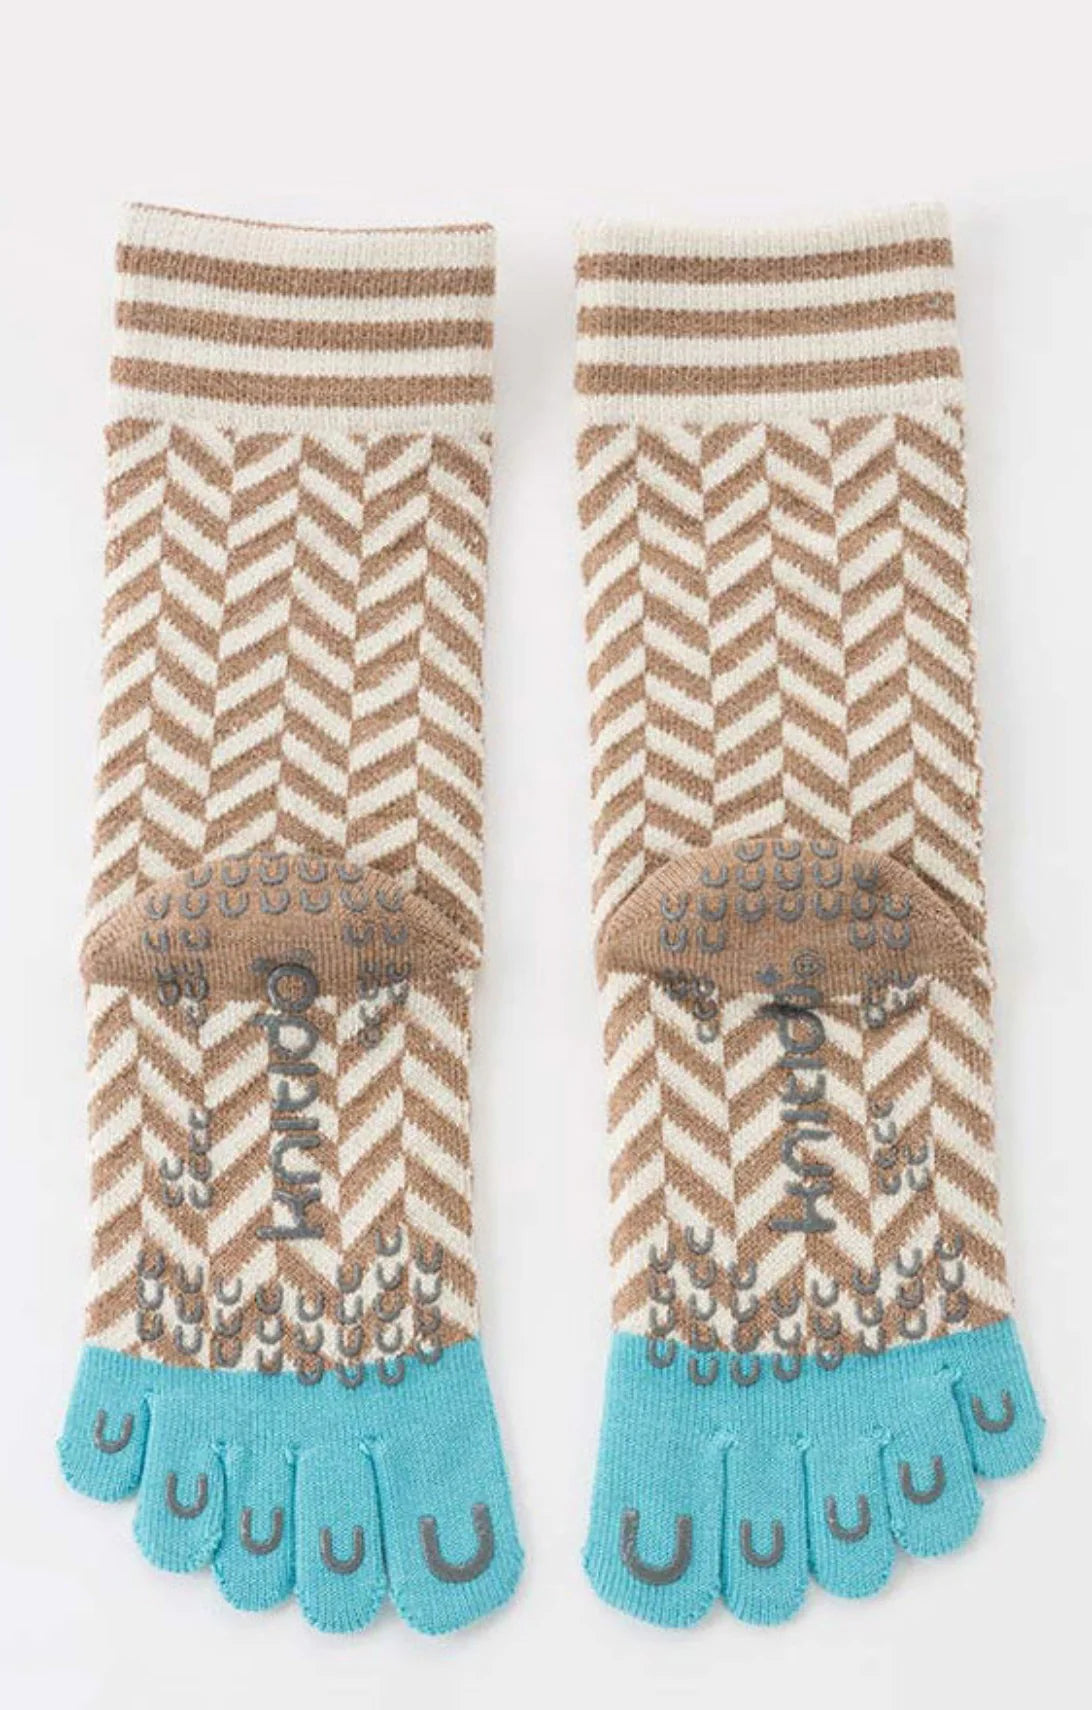 Socks by Knitido plus in Organic Cotton Herringbone Midcalf Toe Grip Socks With Power Pads in Turquoise color back